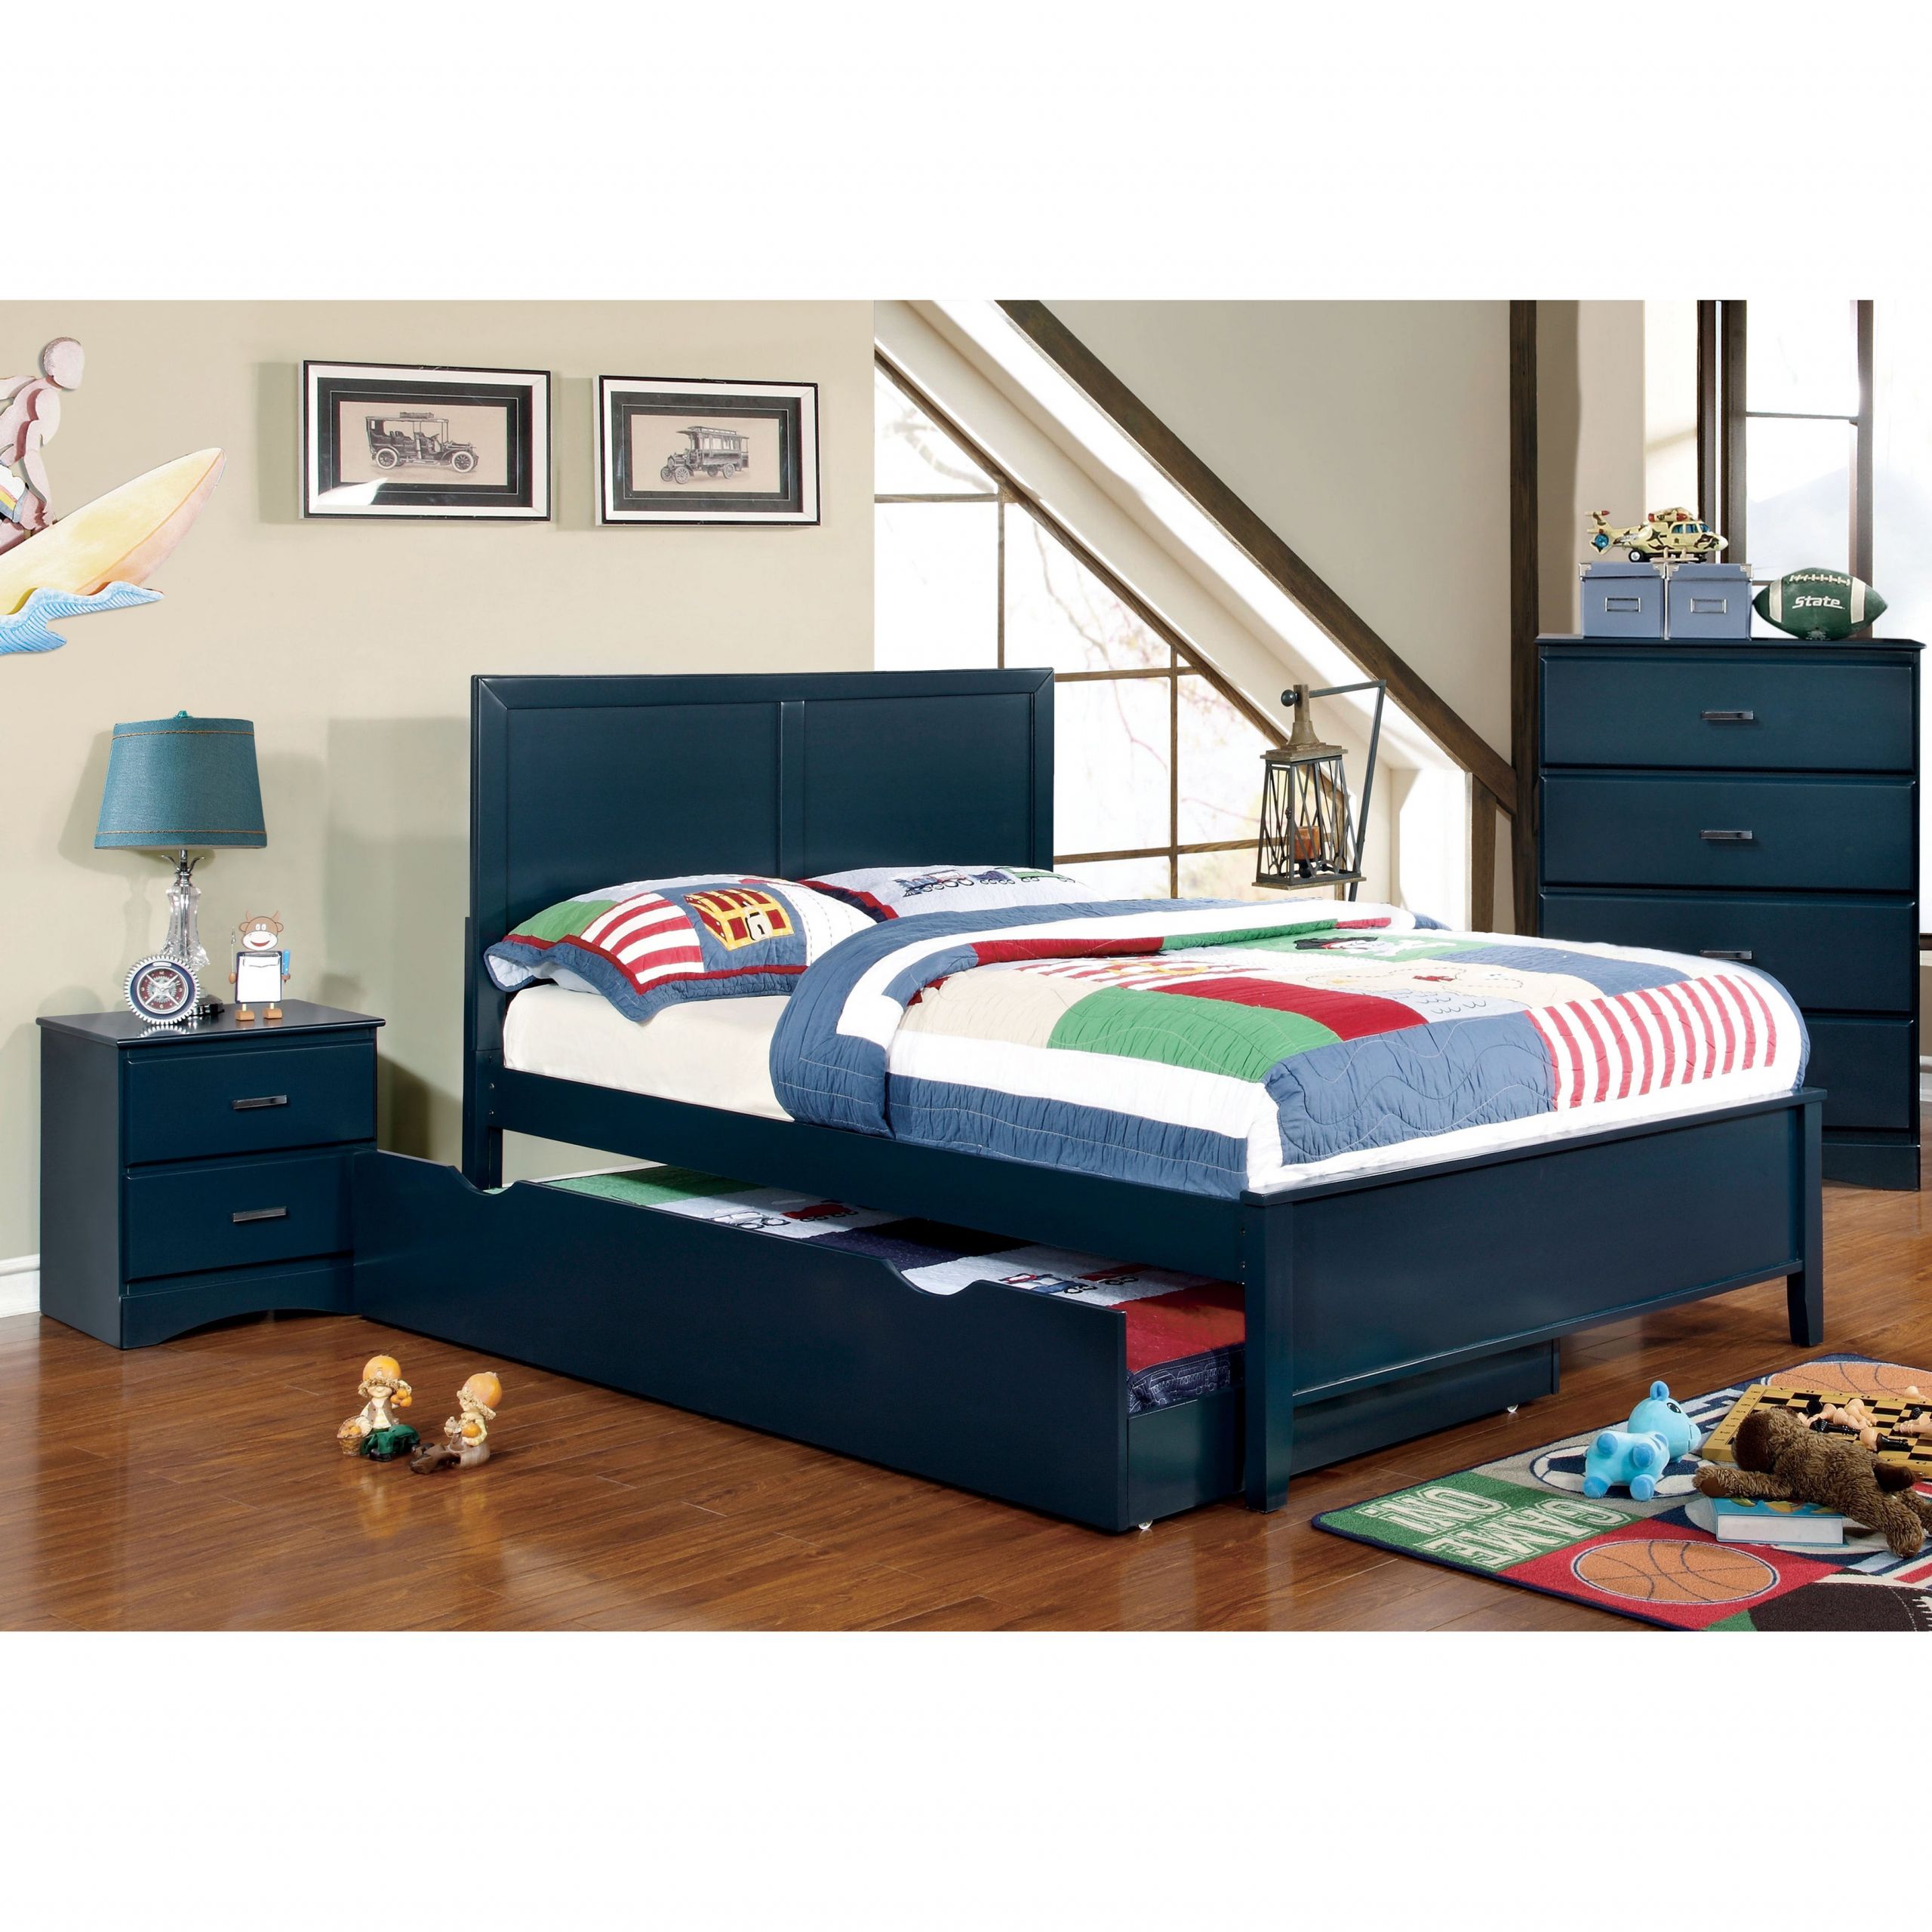 Discount Kids Bedroom Sets
 Furniture of America Colorpop 4 piece Full size Youth